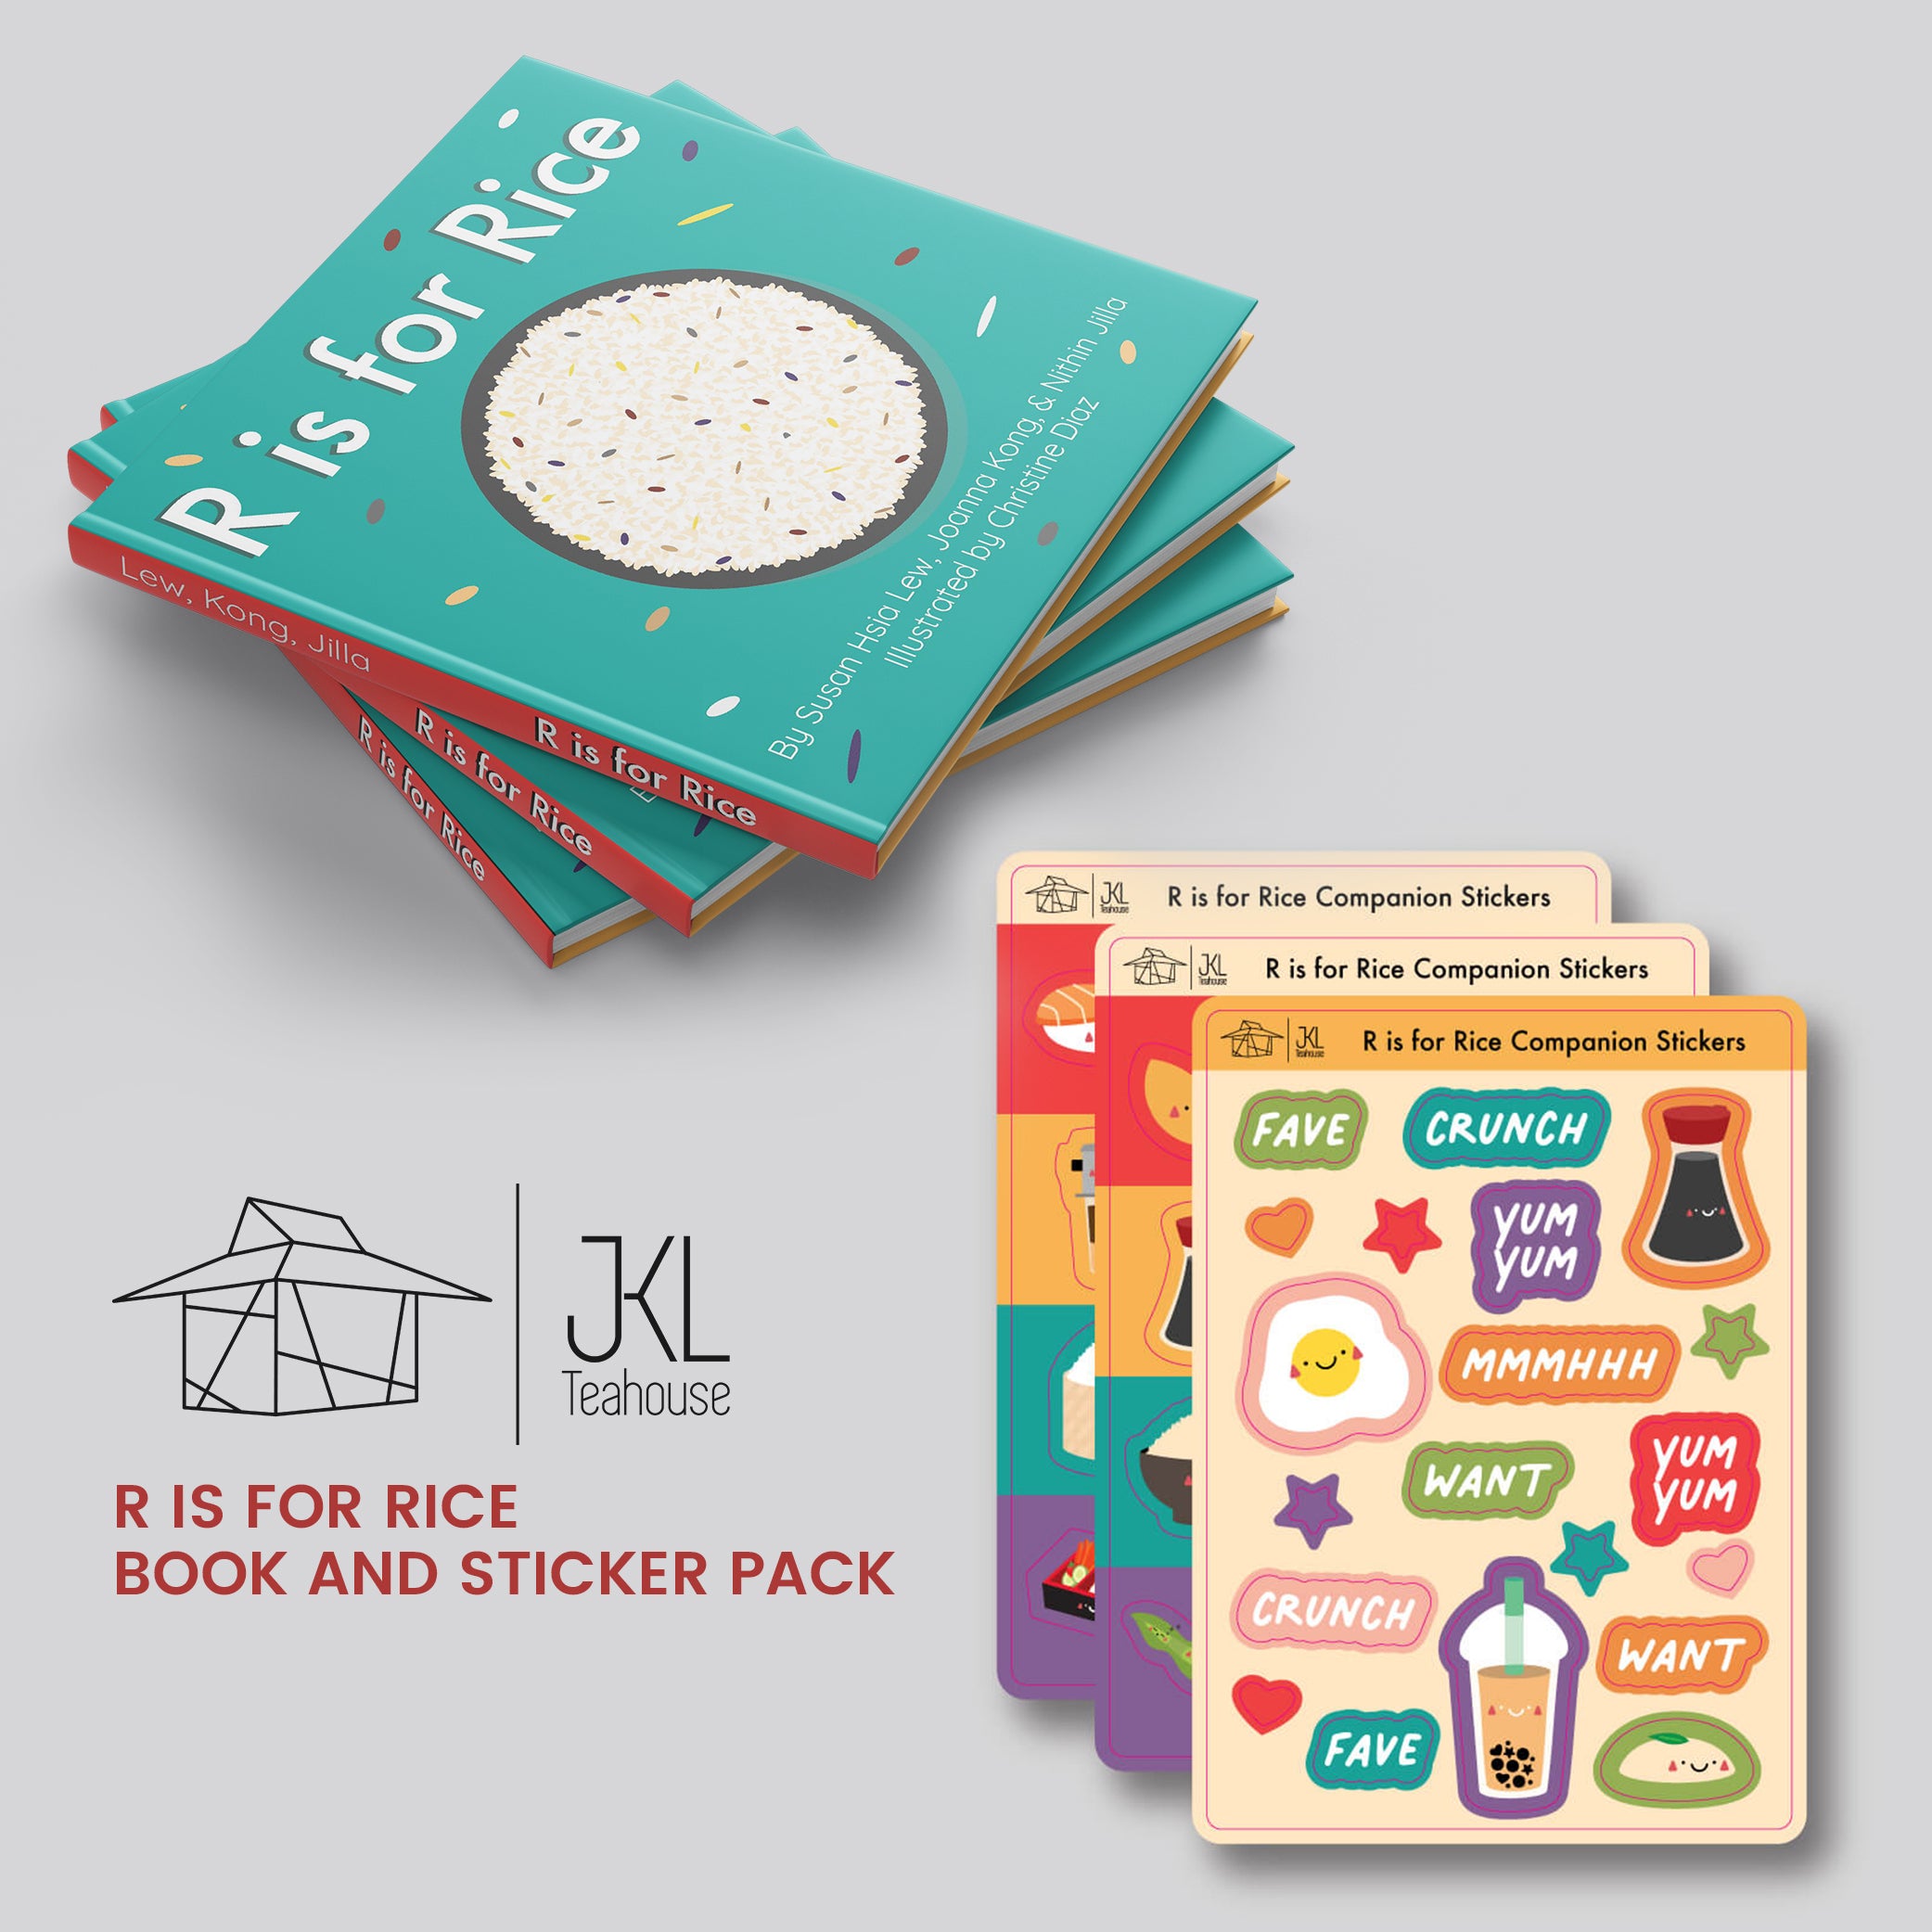 R is for Rice Bundle - Book & Sticker Pack! – JKL Teahouse